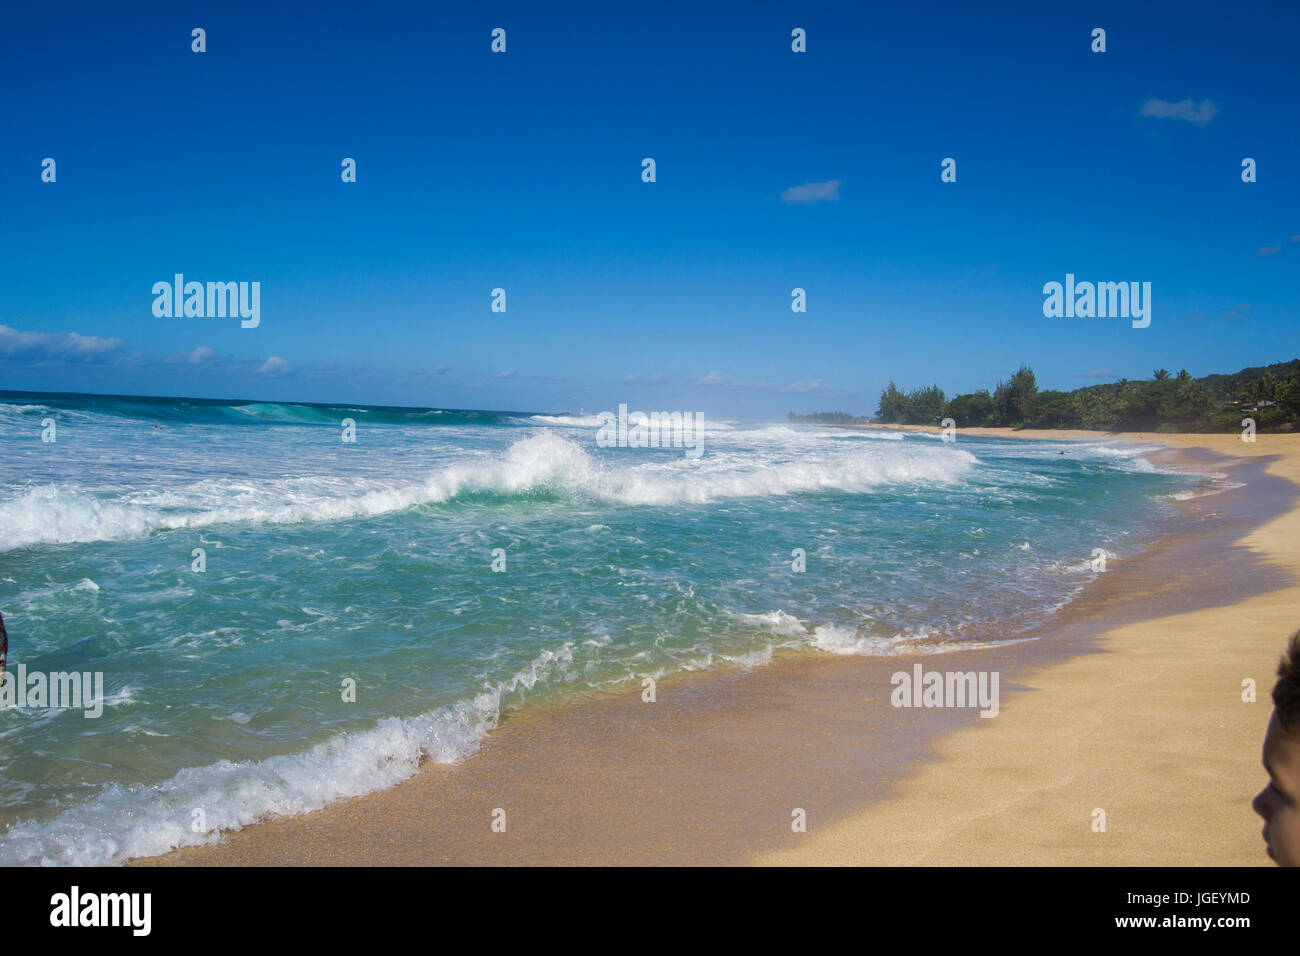 View of the Ocean in Hawaii Stock Photo